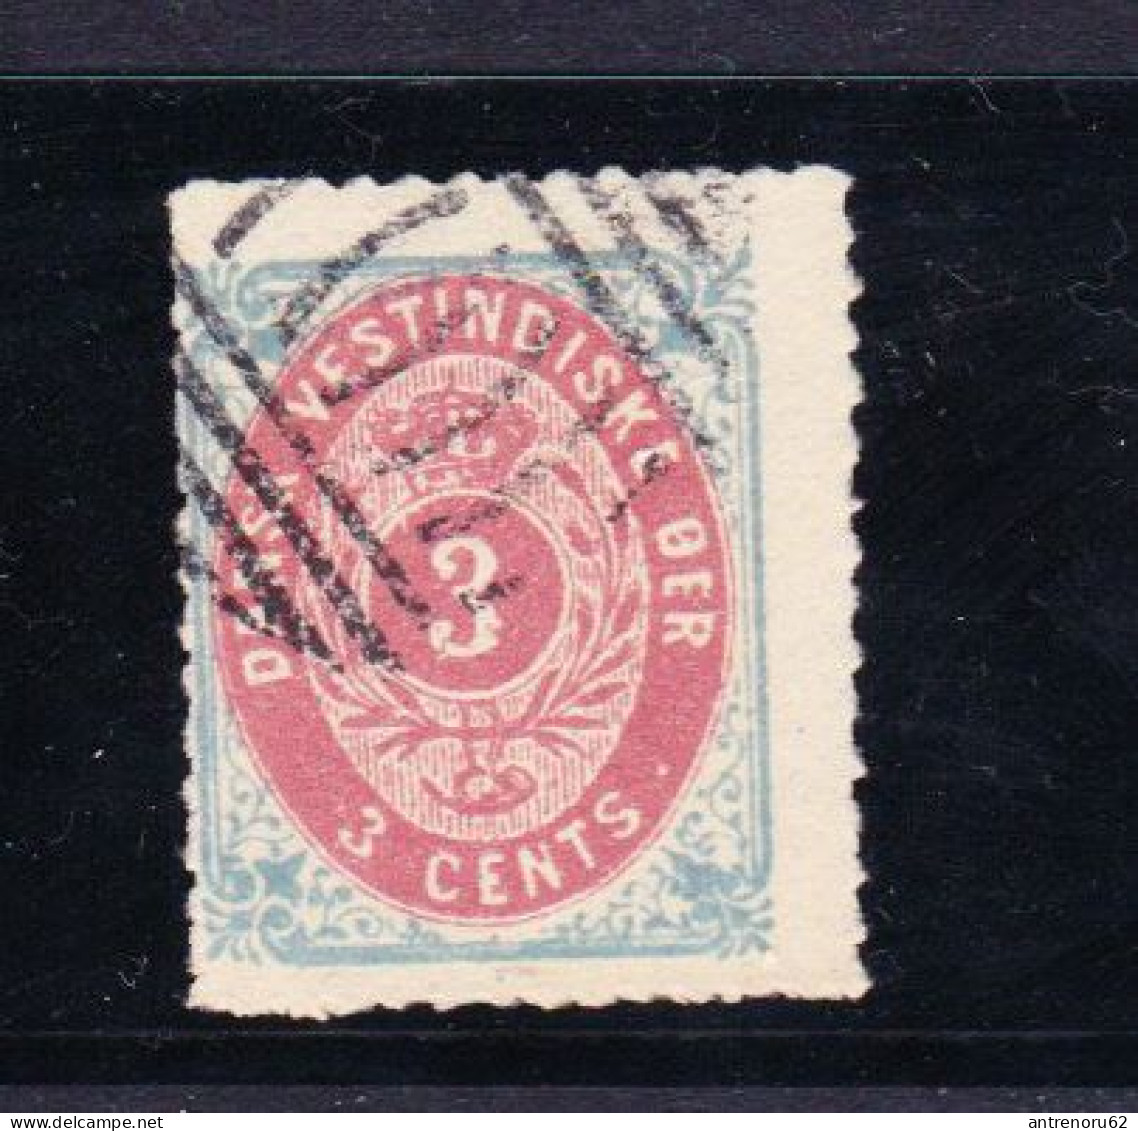 STAMPS-DENMARK-WEST-INDIES-1873-USED-SEE-SCAN - Deens West-Indië